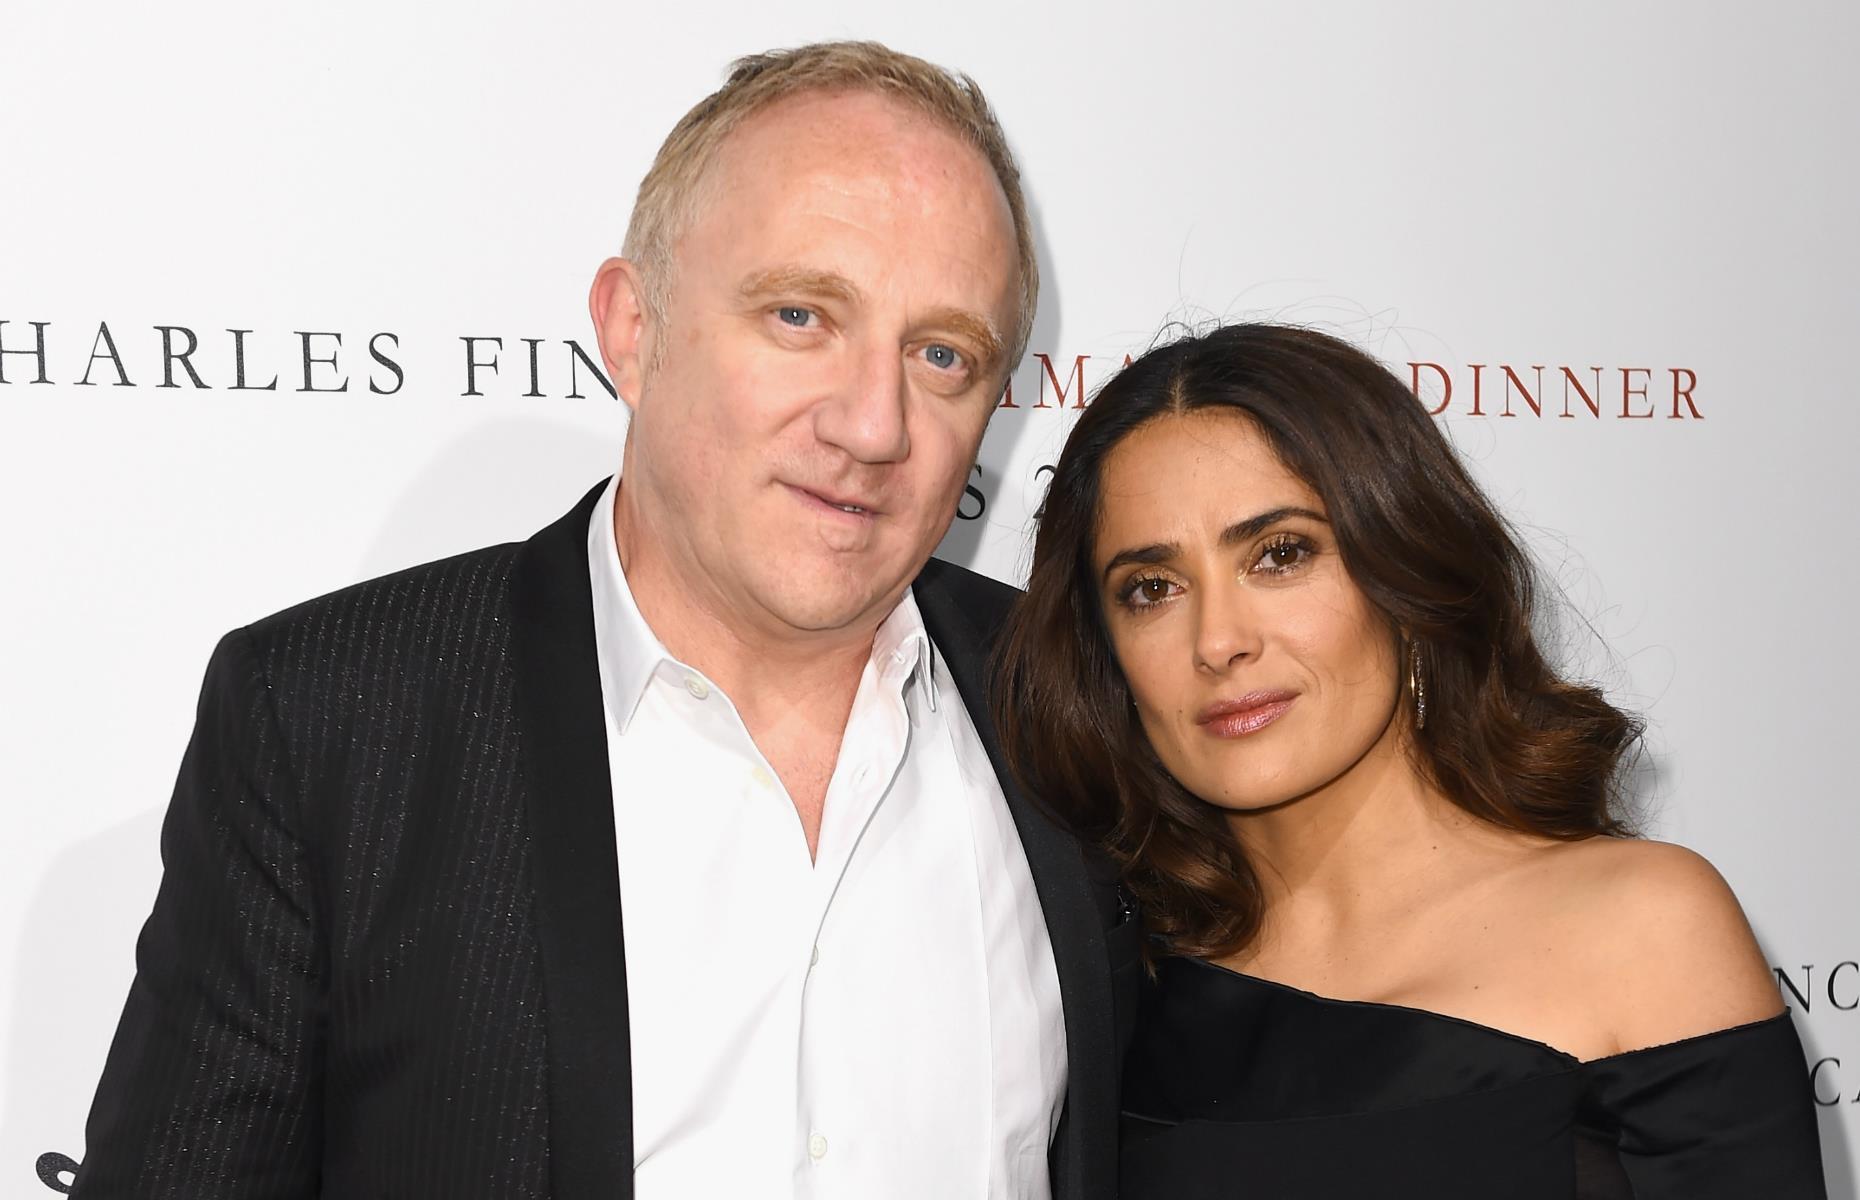 <p>What began as a wood and building materials company in 1963 took a turn towards high-end fashion when François Pinault bought a controlling stake in the Gucci Group in 1999.</p>  <p>The fashion empire Kering now owns brands including Stella McCartney, Saint Laurent, and Alexander McQueen, and is run by Pinault's son François-Henri, who is married to Hollywood actress Salma Hayek.</p>